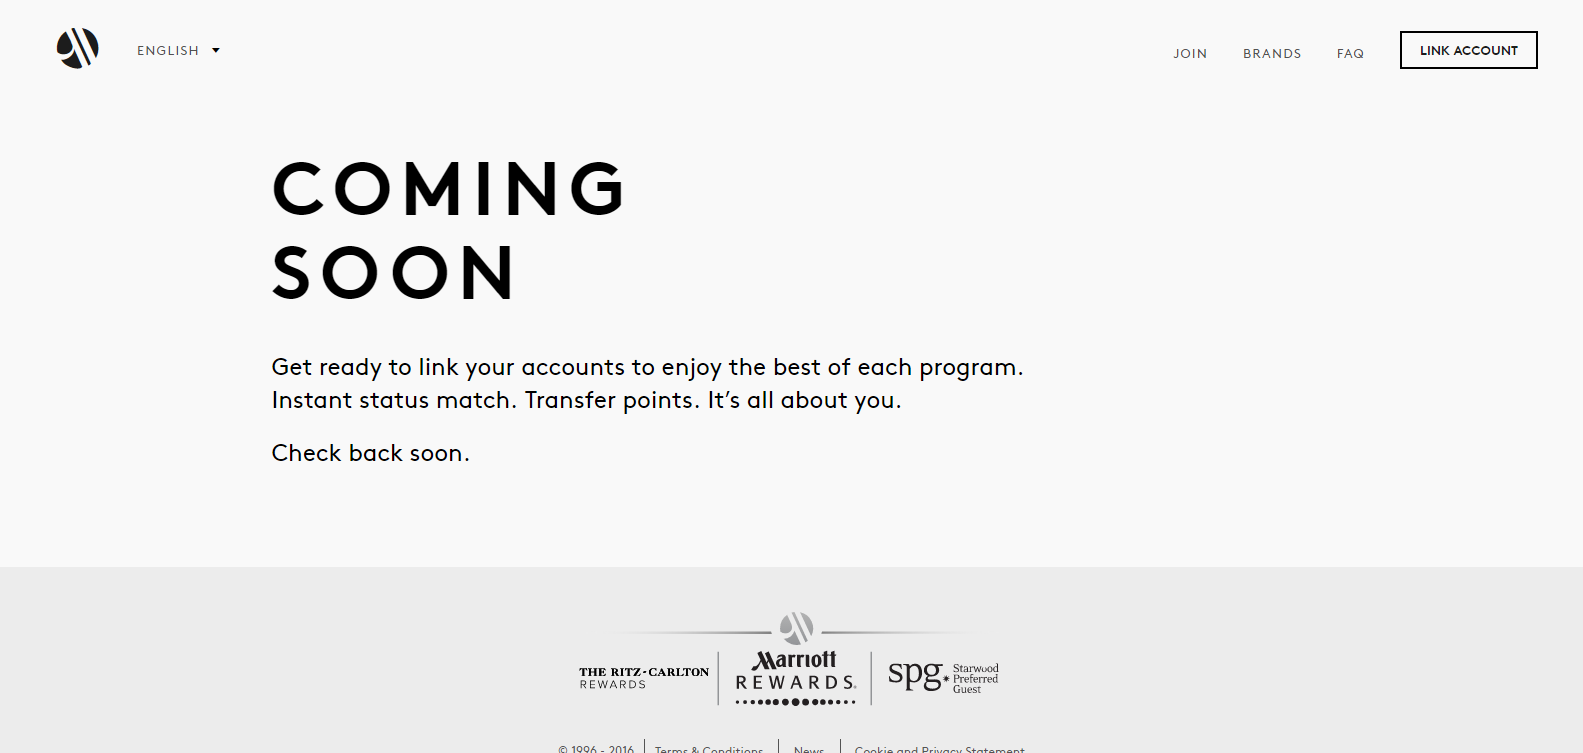 Everything You Need to Know about Marriott Rewards and SPG Integration ...